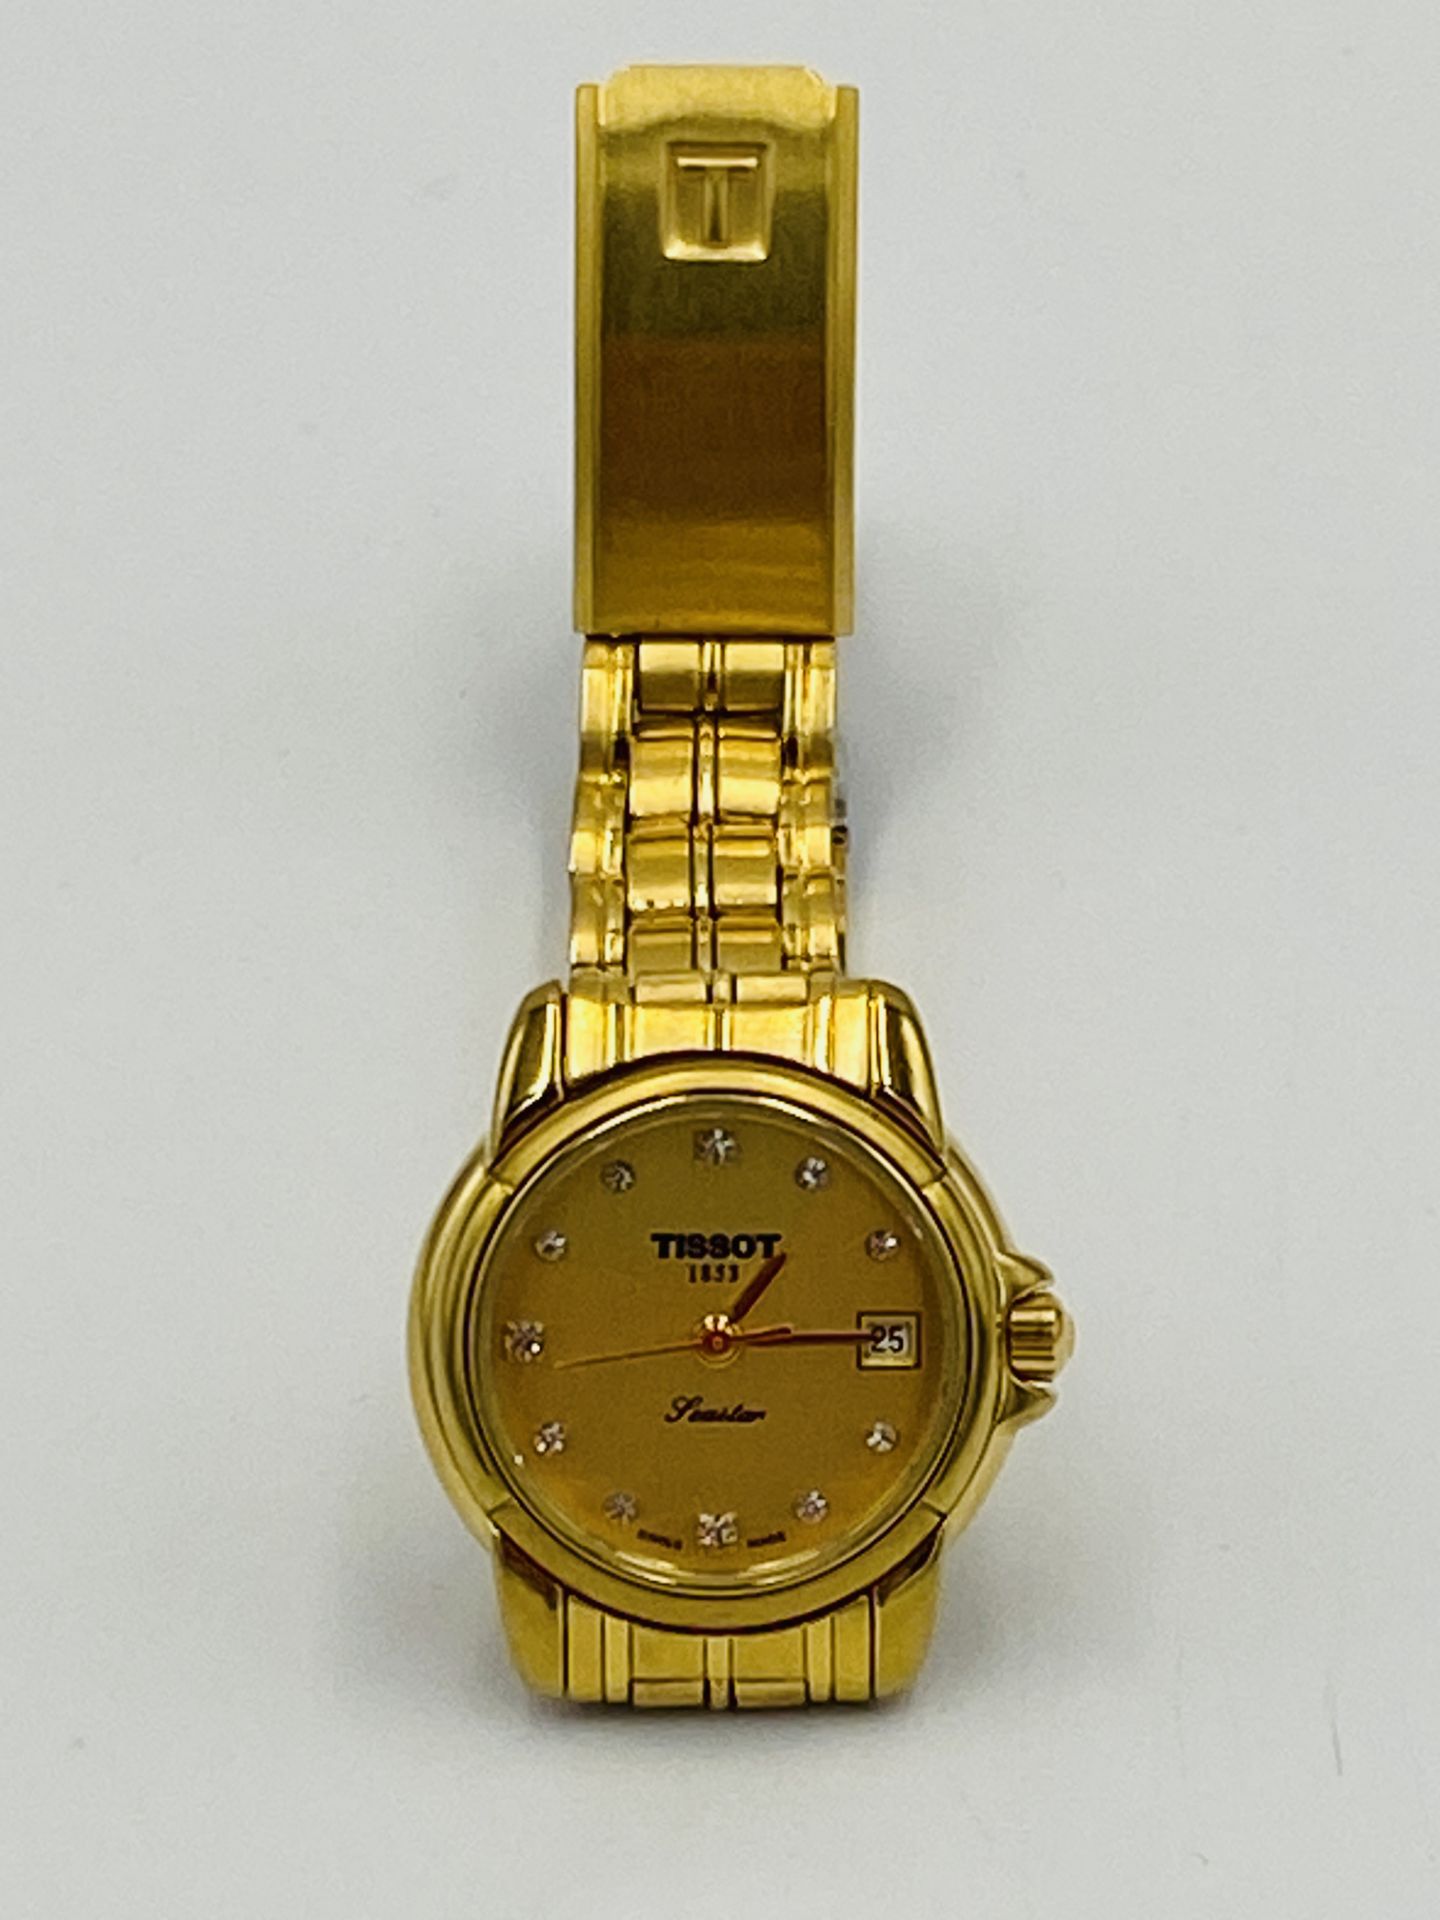 Tissot gold plated ladies watch - Image 4 of 5